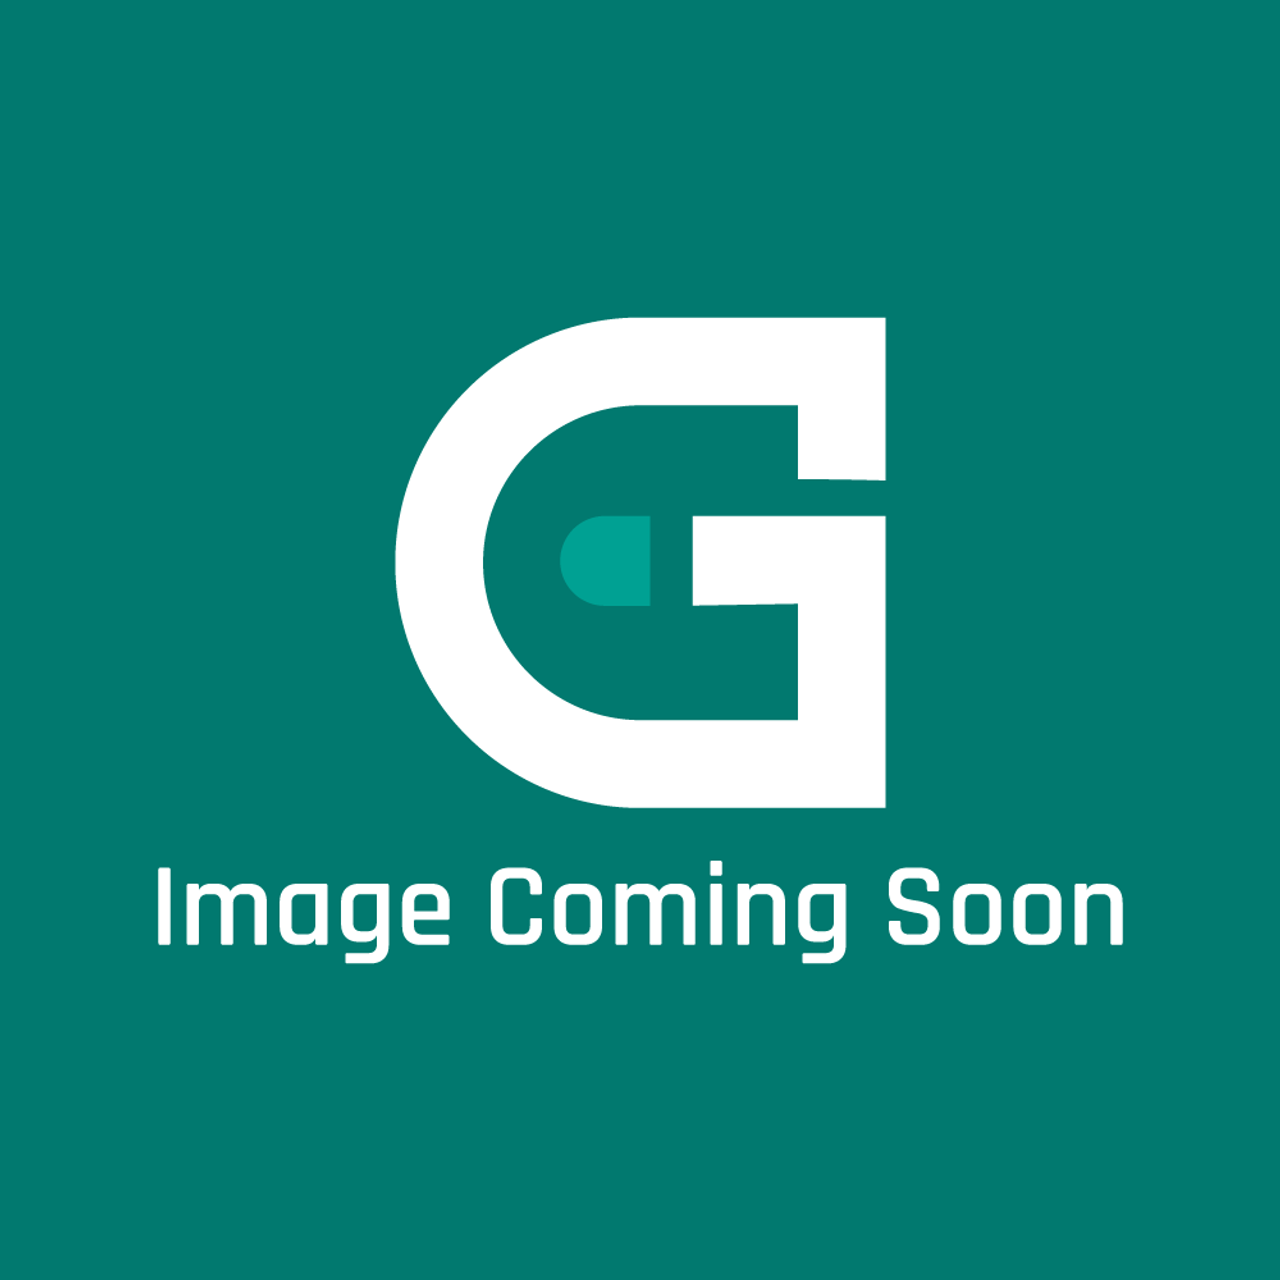 Groen 056963 - Fuse 3 Amp 600 Volt - Image Coming Soon!